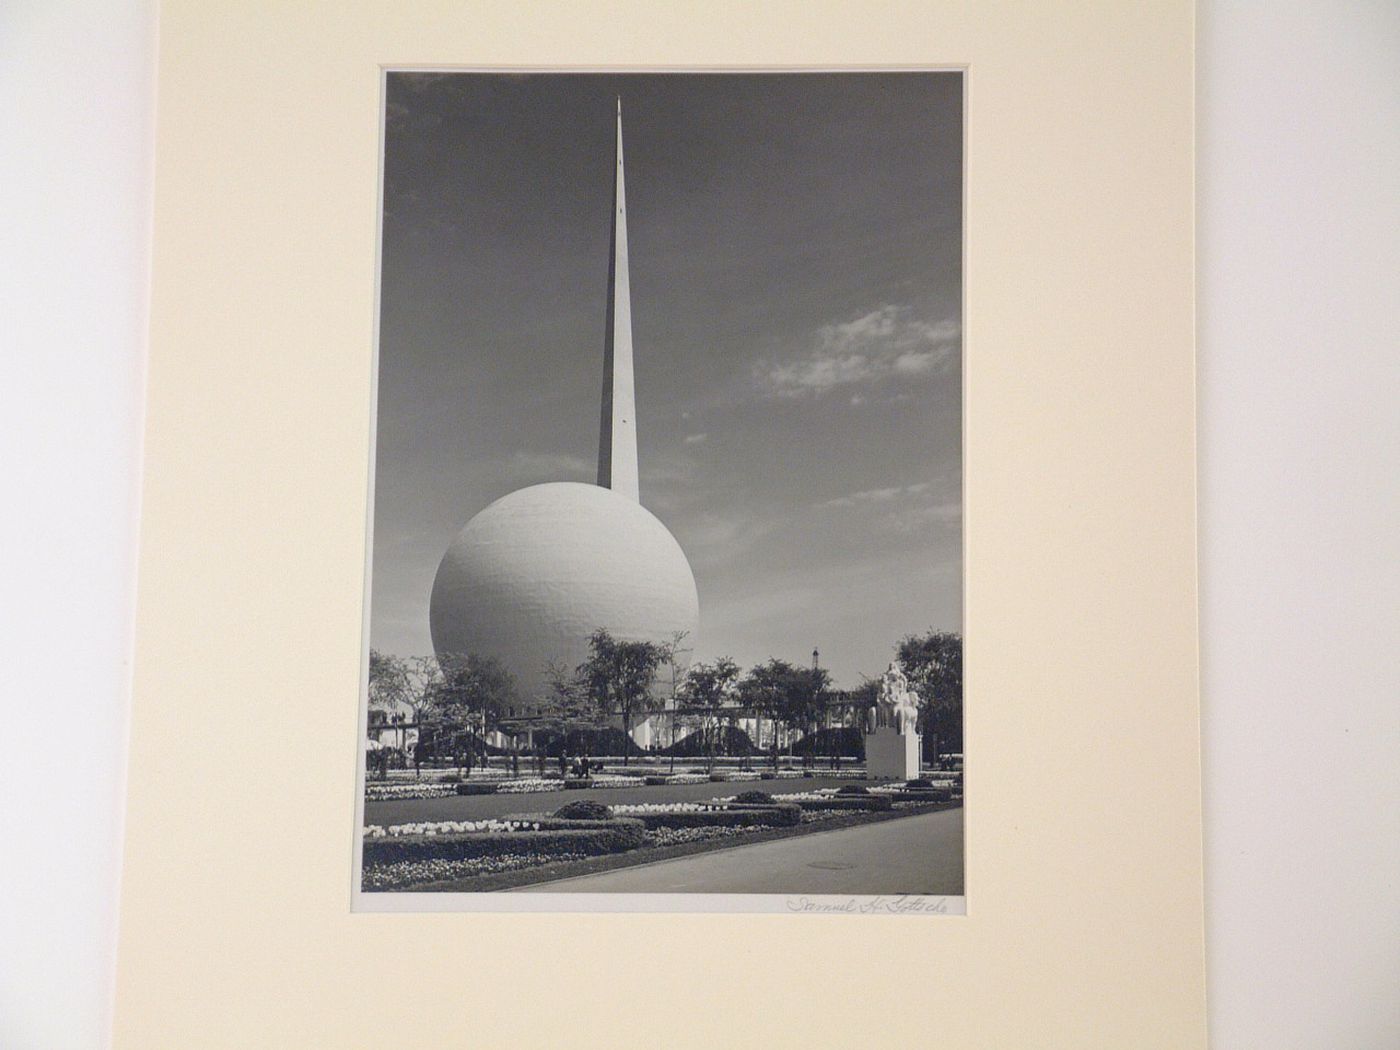 New York World's Fair (1939-1940): View of Perisphere and Trylon, garden in foreground